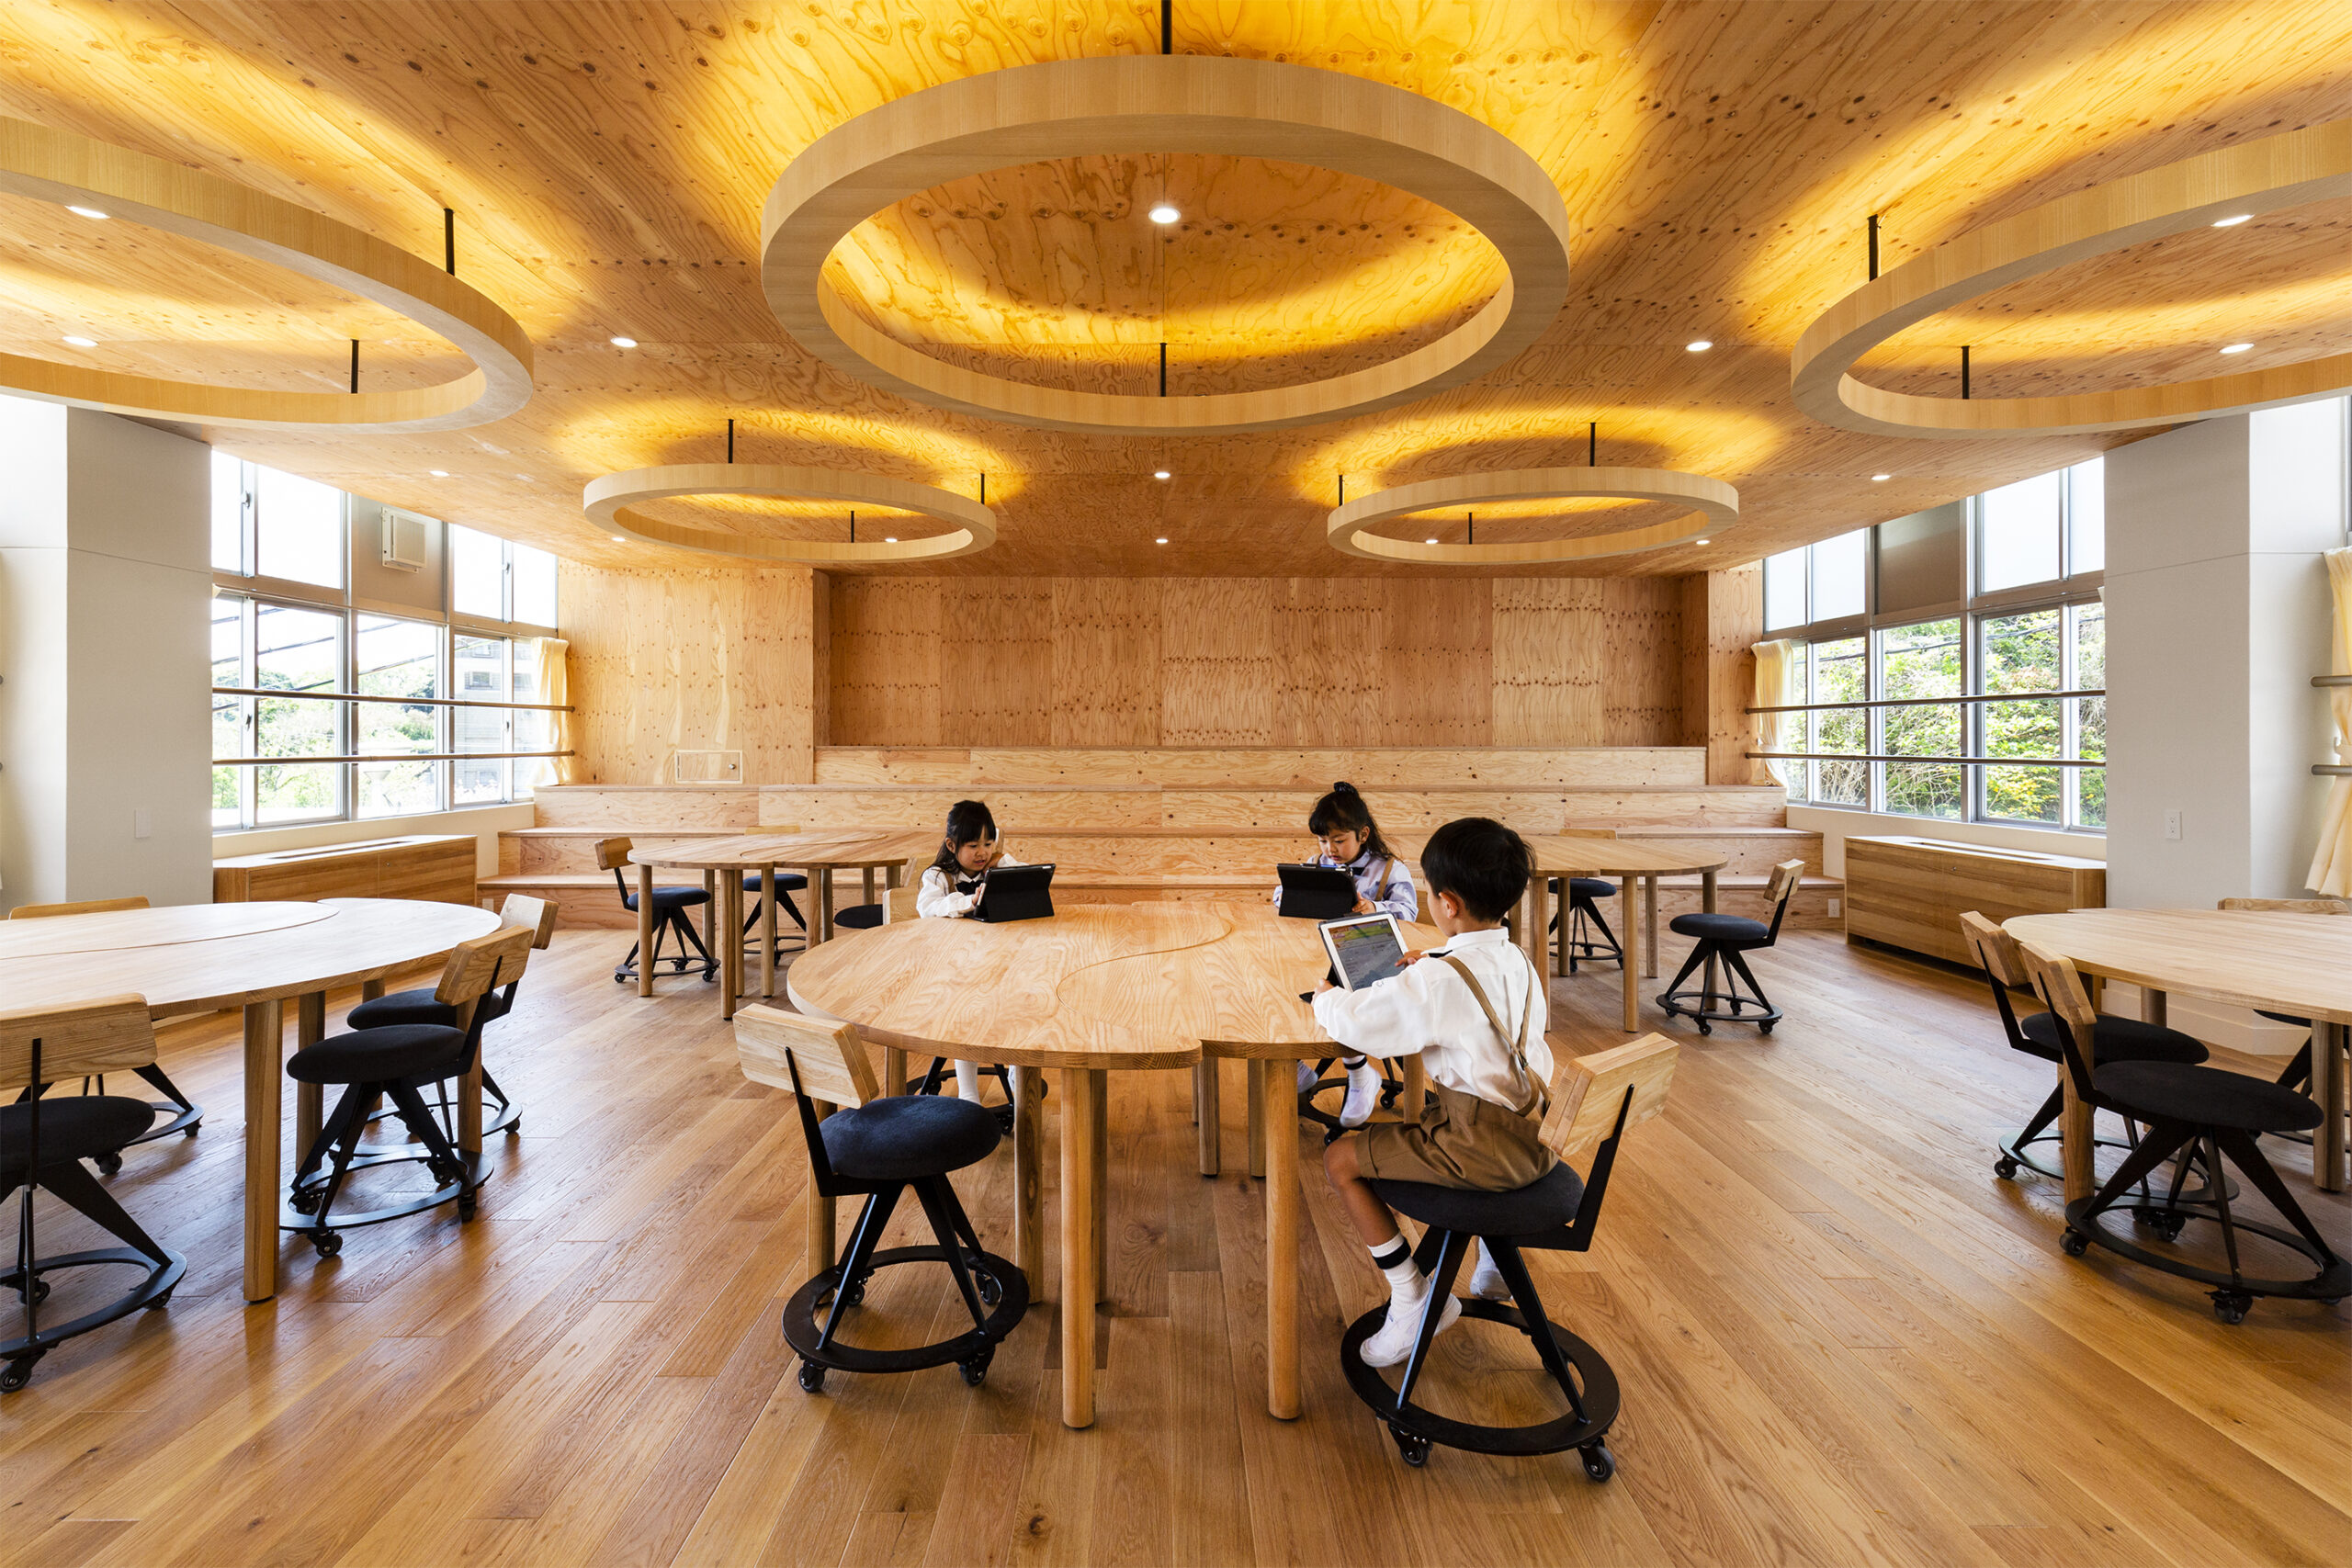 A photo showcasing a classroom, featuring wooden floors, furniture and cladding, as well as circular wooden lighting fixtures on the ceiling.